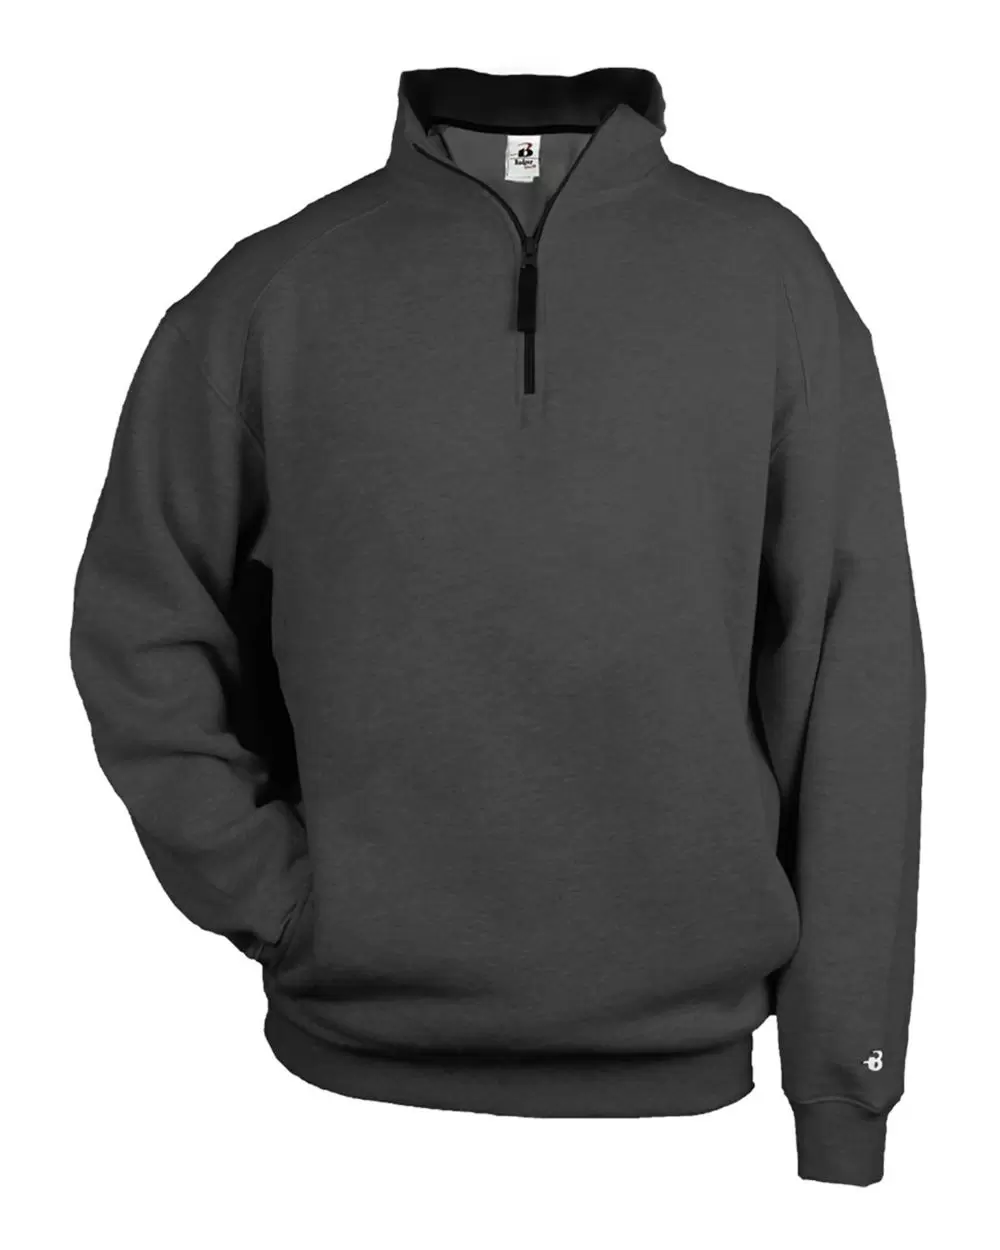 Tek Gear Performance Fleece Pullover 1/4 Zip Size Large Charcoal Gray New  W/Tags